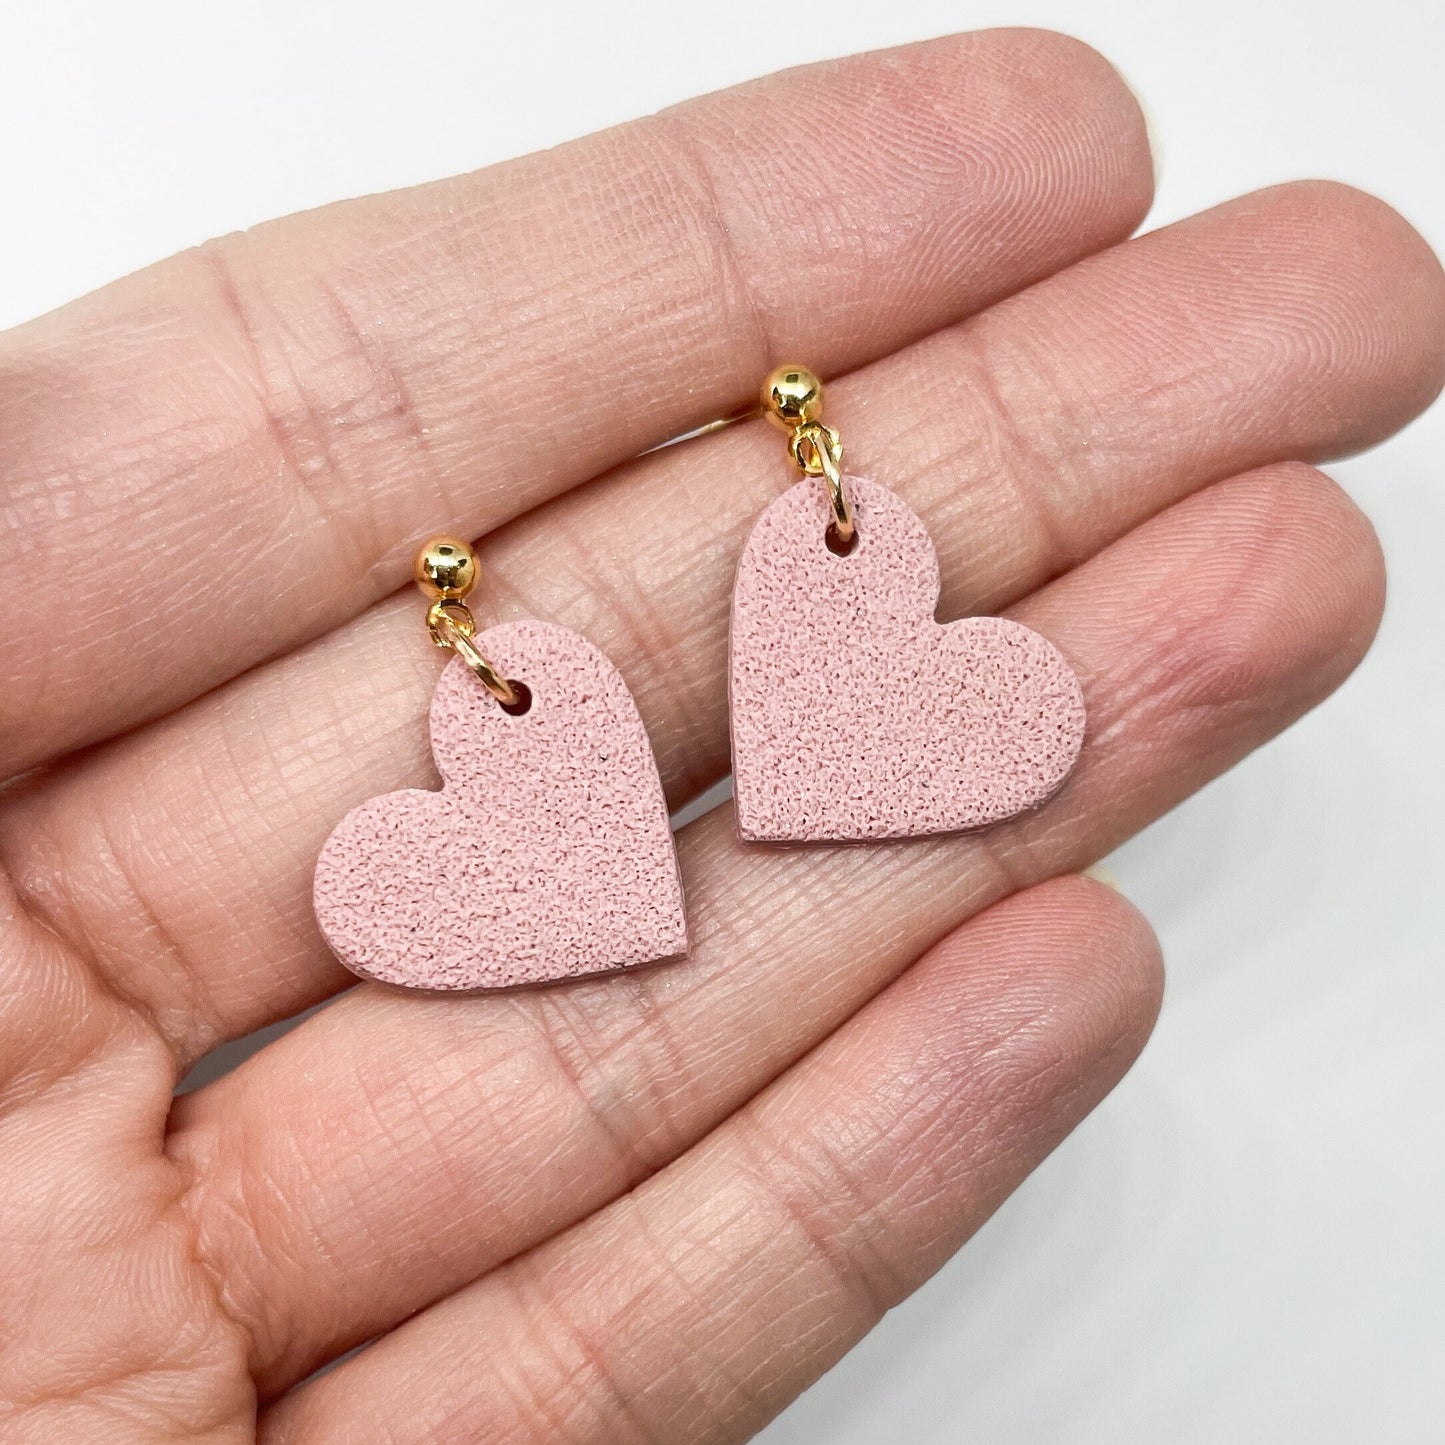 Mended heart, pink and black polymer clay stud earrings.